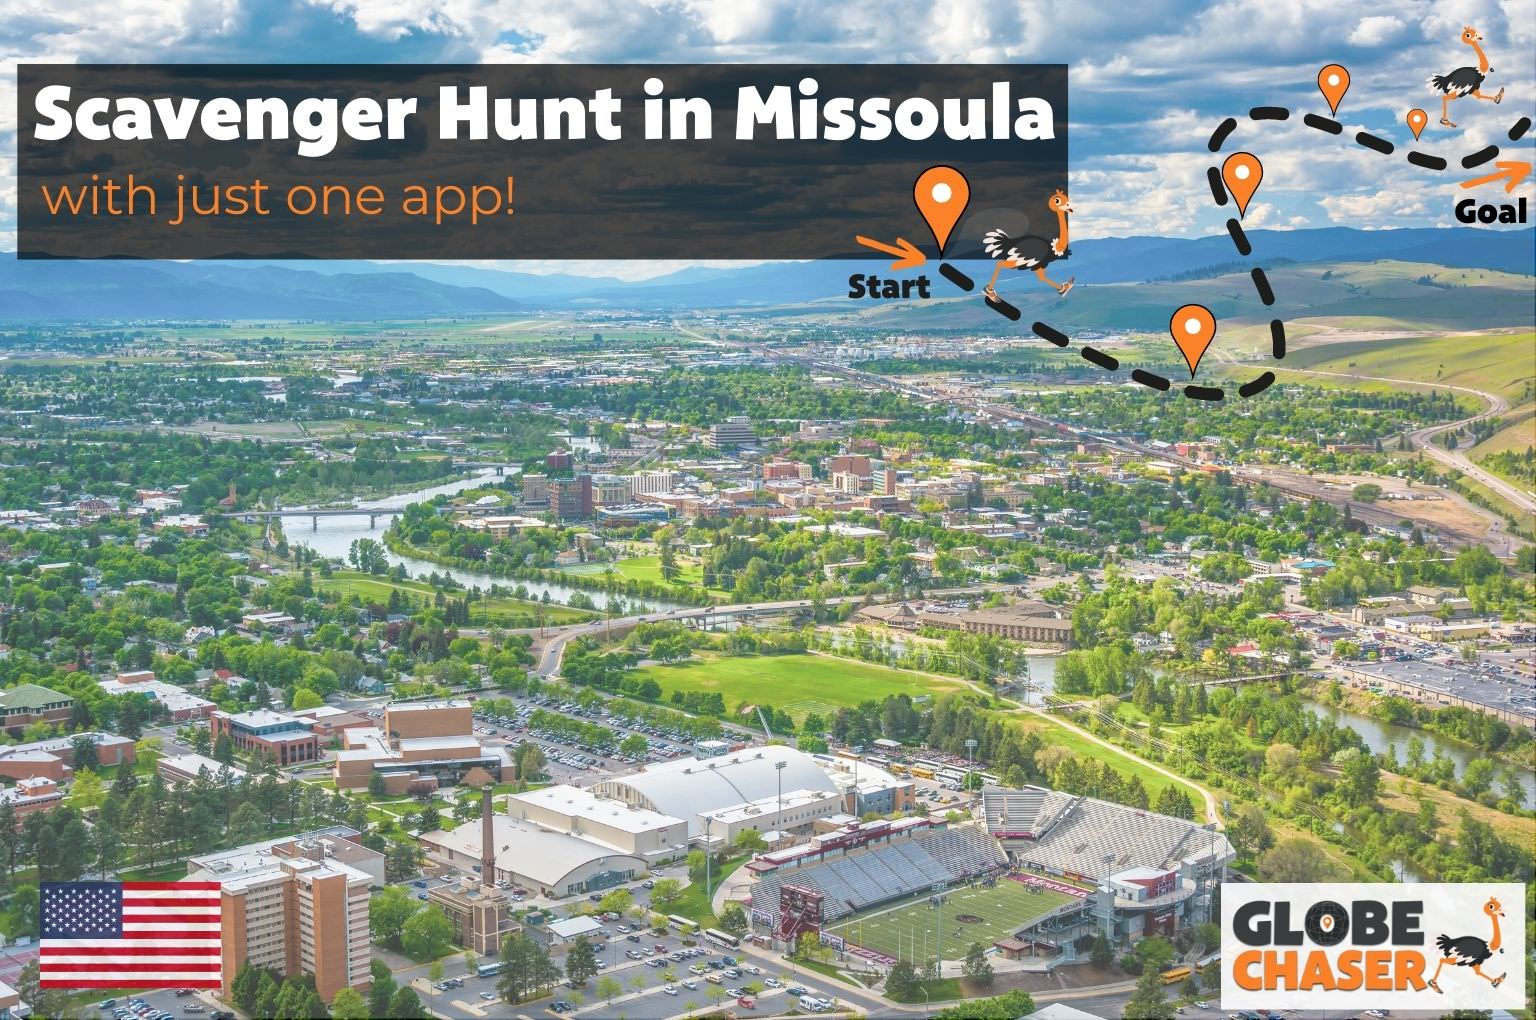 Scavenger Hunt in Missoula, USA - Family Activities with the Globe Chaser App for Outdoor Fun